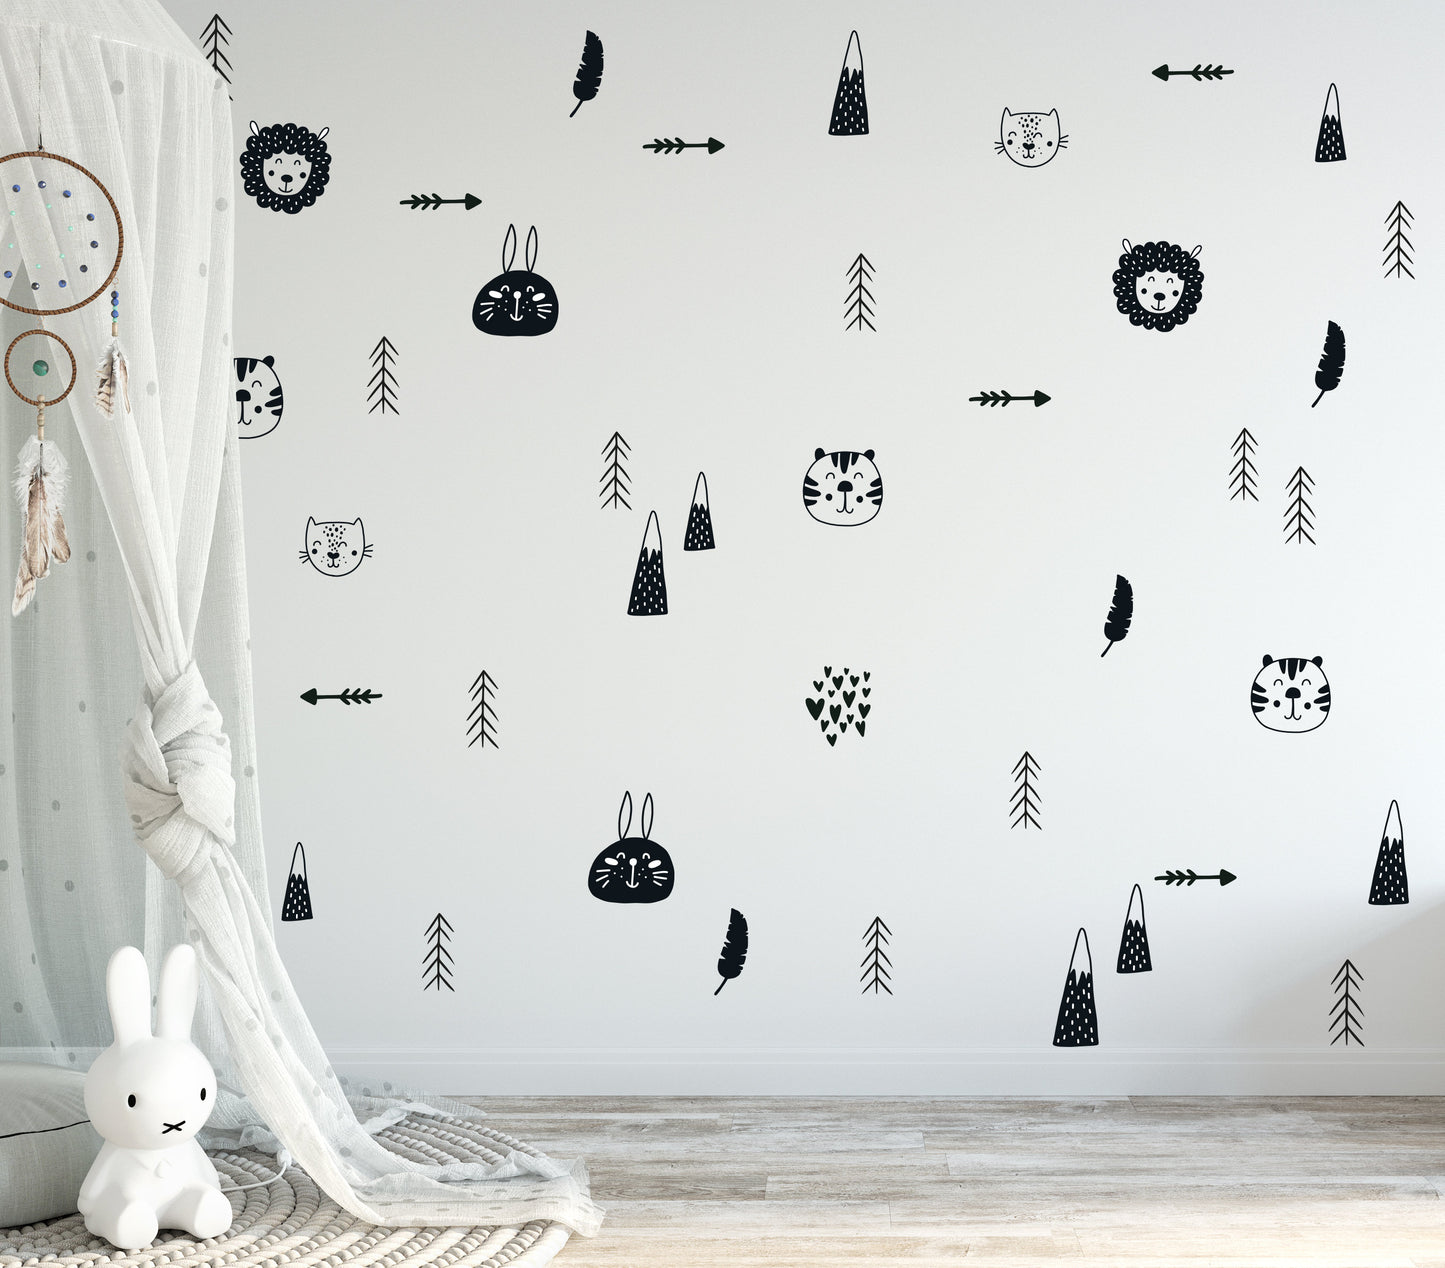 Scandi Animals Wall Stickers Scandinavian Wall Decor For Nursery Kids Room Childrens Bedroom Wall Decals Removable Boho Chic Art